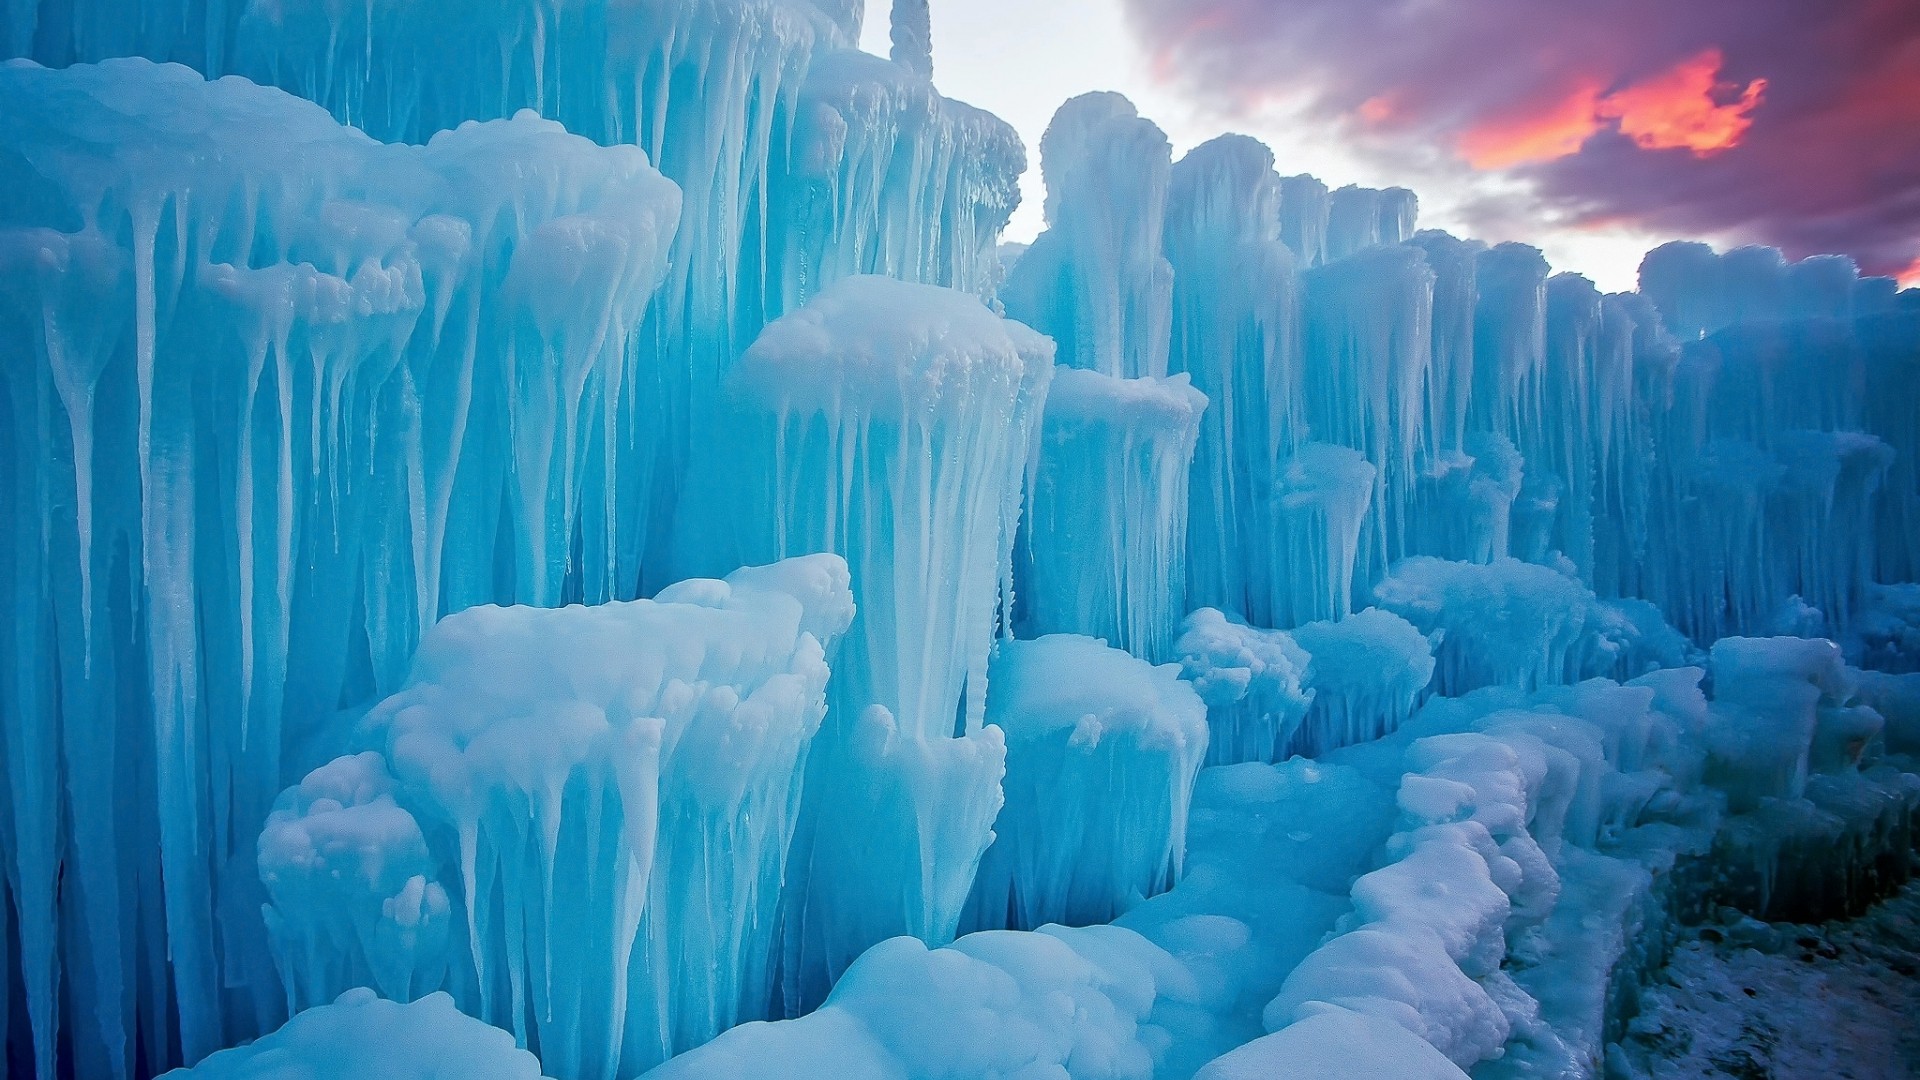 Nature Landscape Winter Snow Ice Iceberg Icicle Blue Clouds Sunset Frost 1920x1080